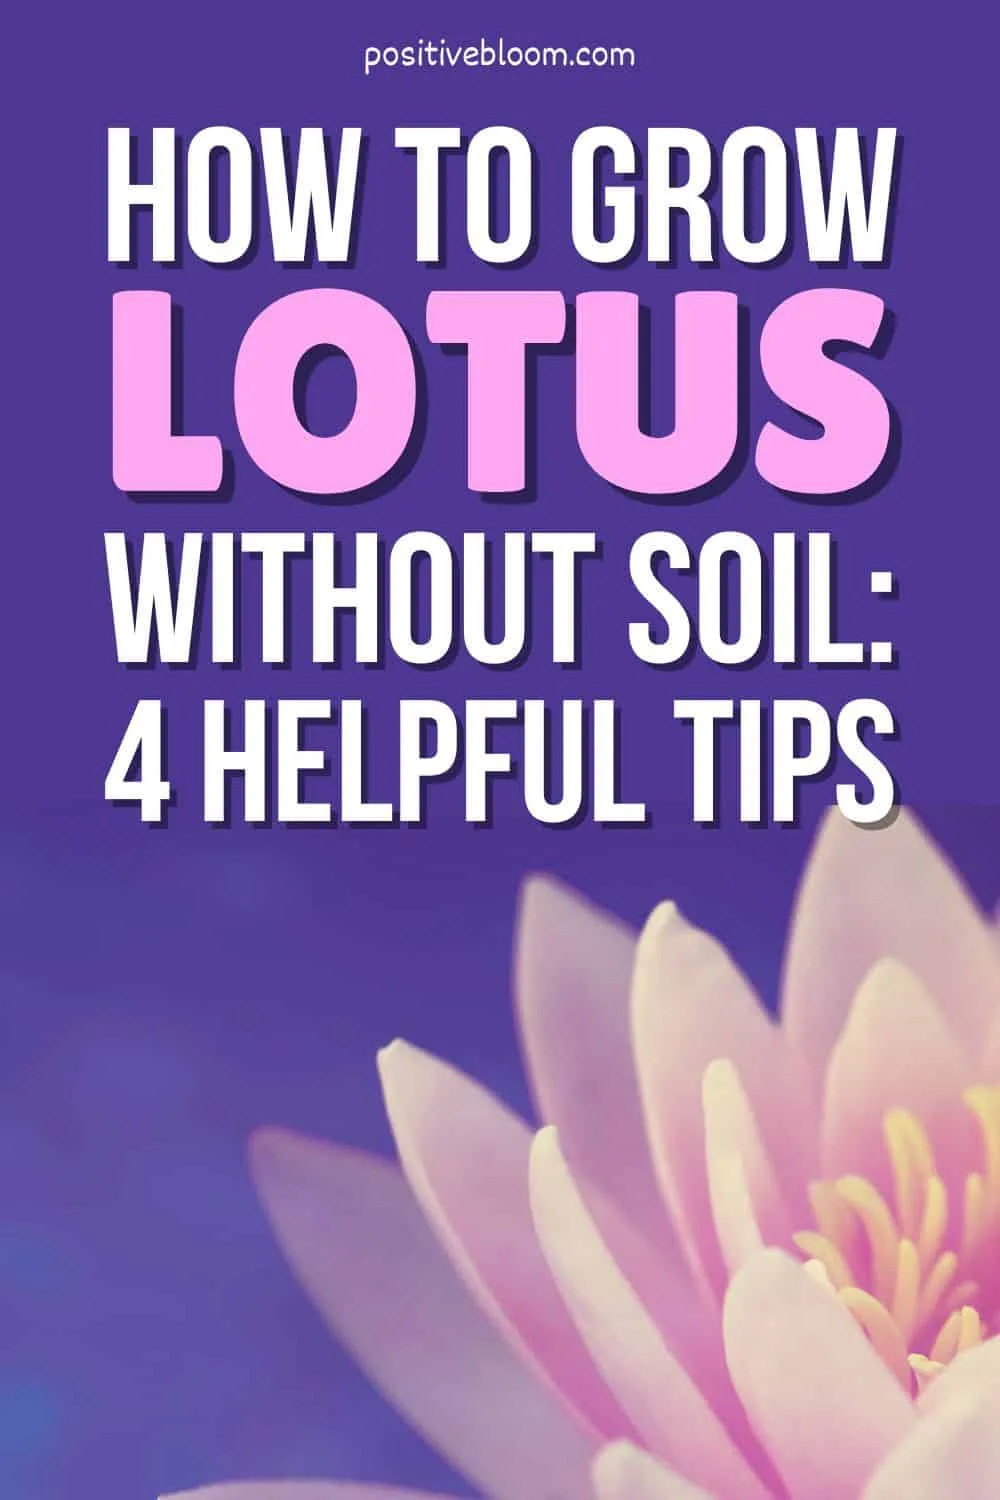 How To Grow Lotus Without Soil 4 Helpful Tips Pinterest